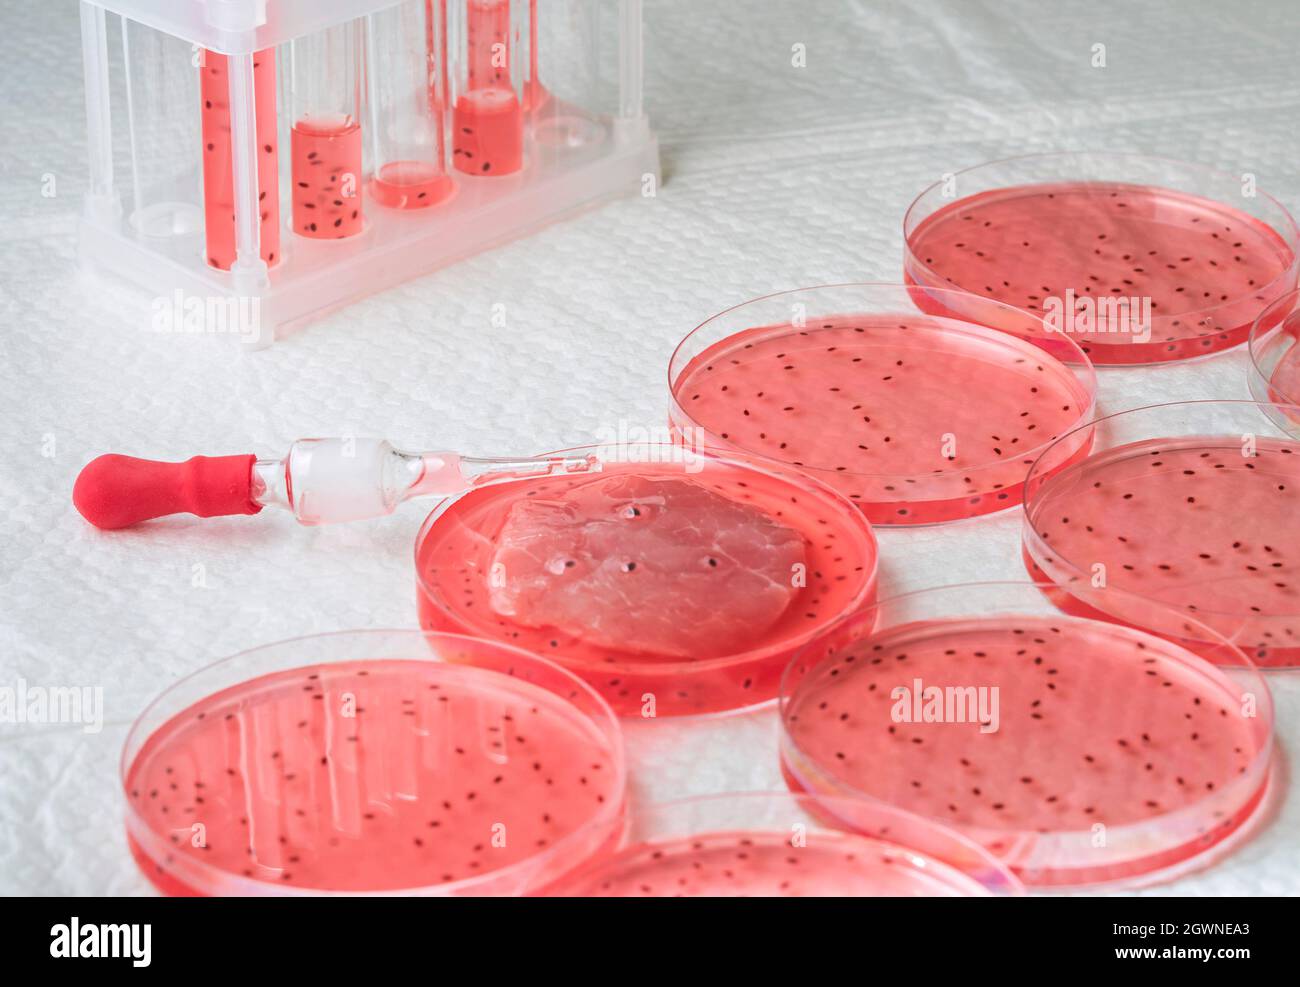 Cultivated Steak, Meat From The Plant Stem Cell, Laboratory Grown Meat Concept Stock Photo